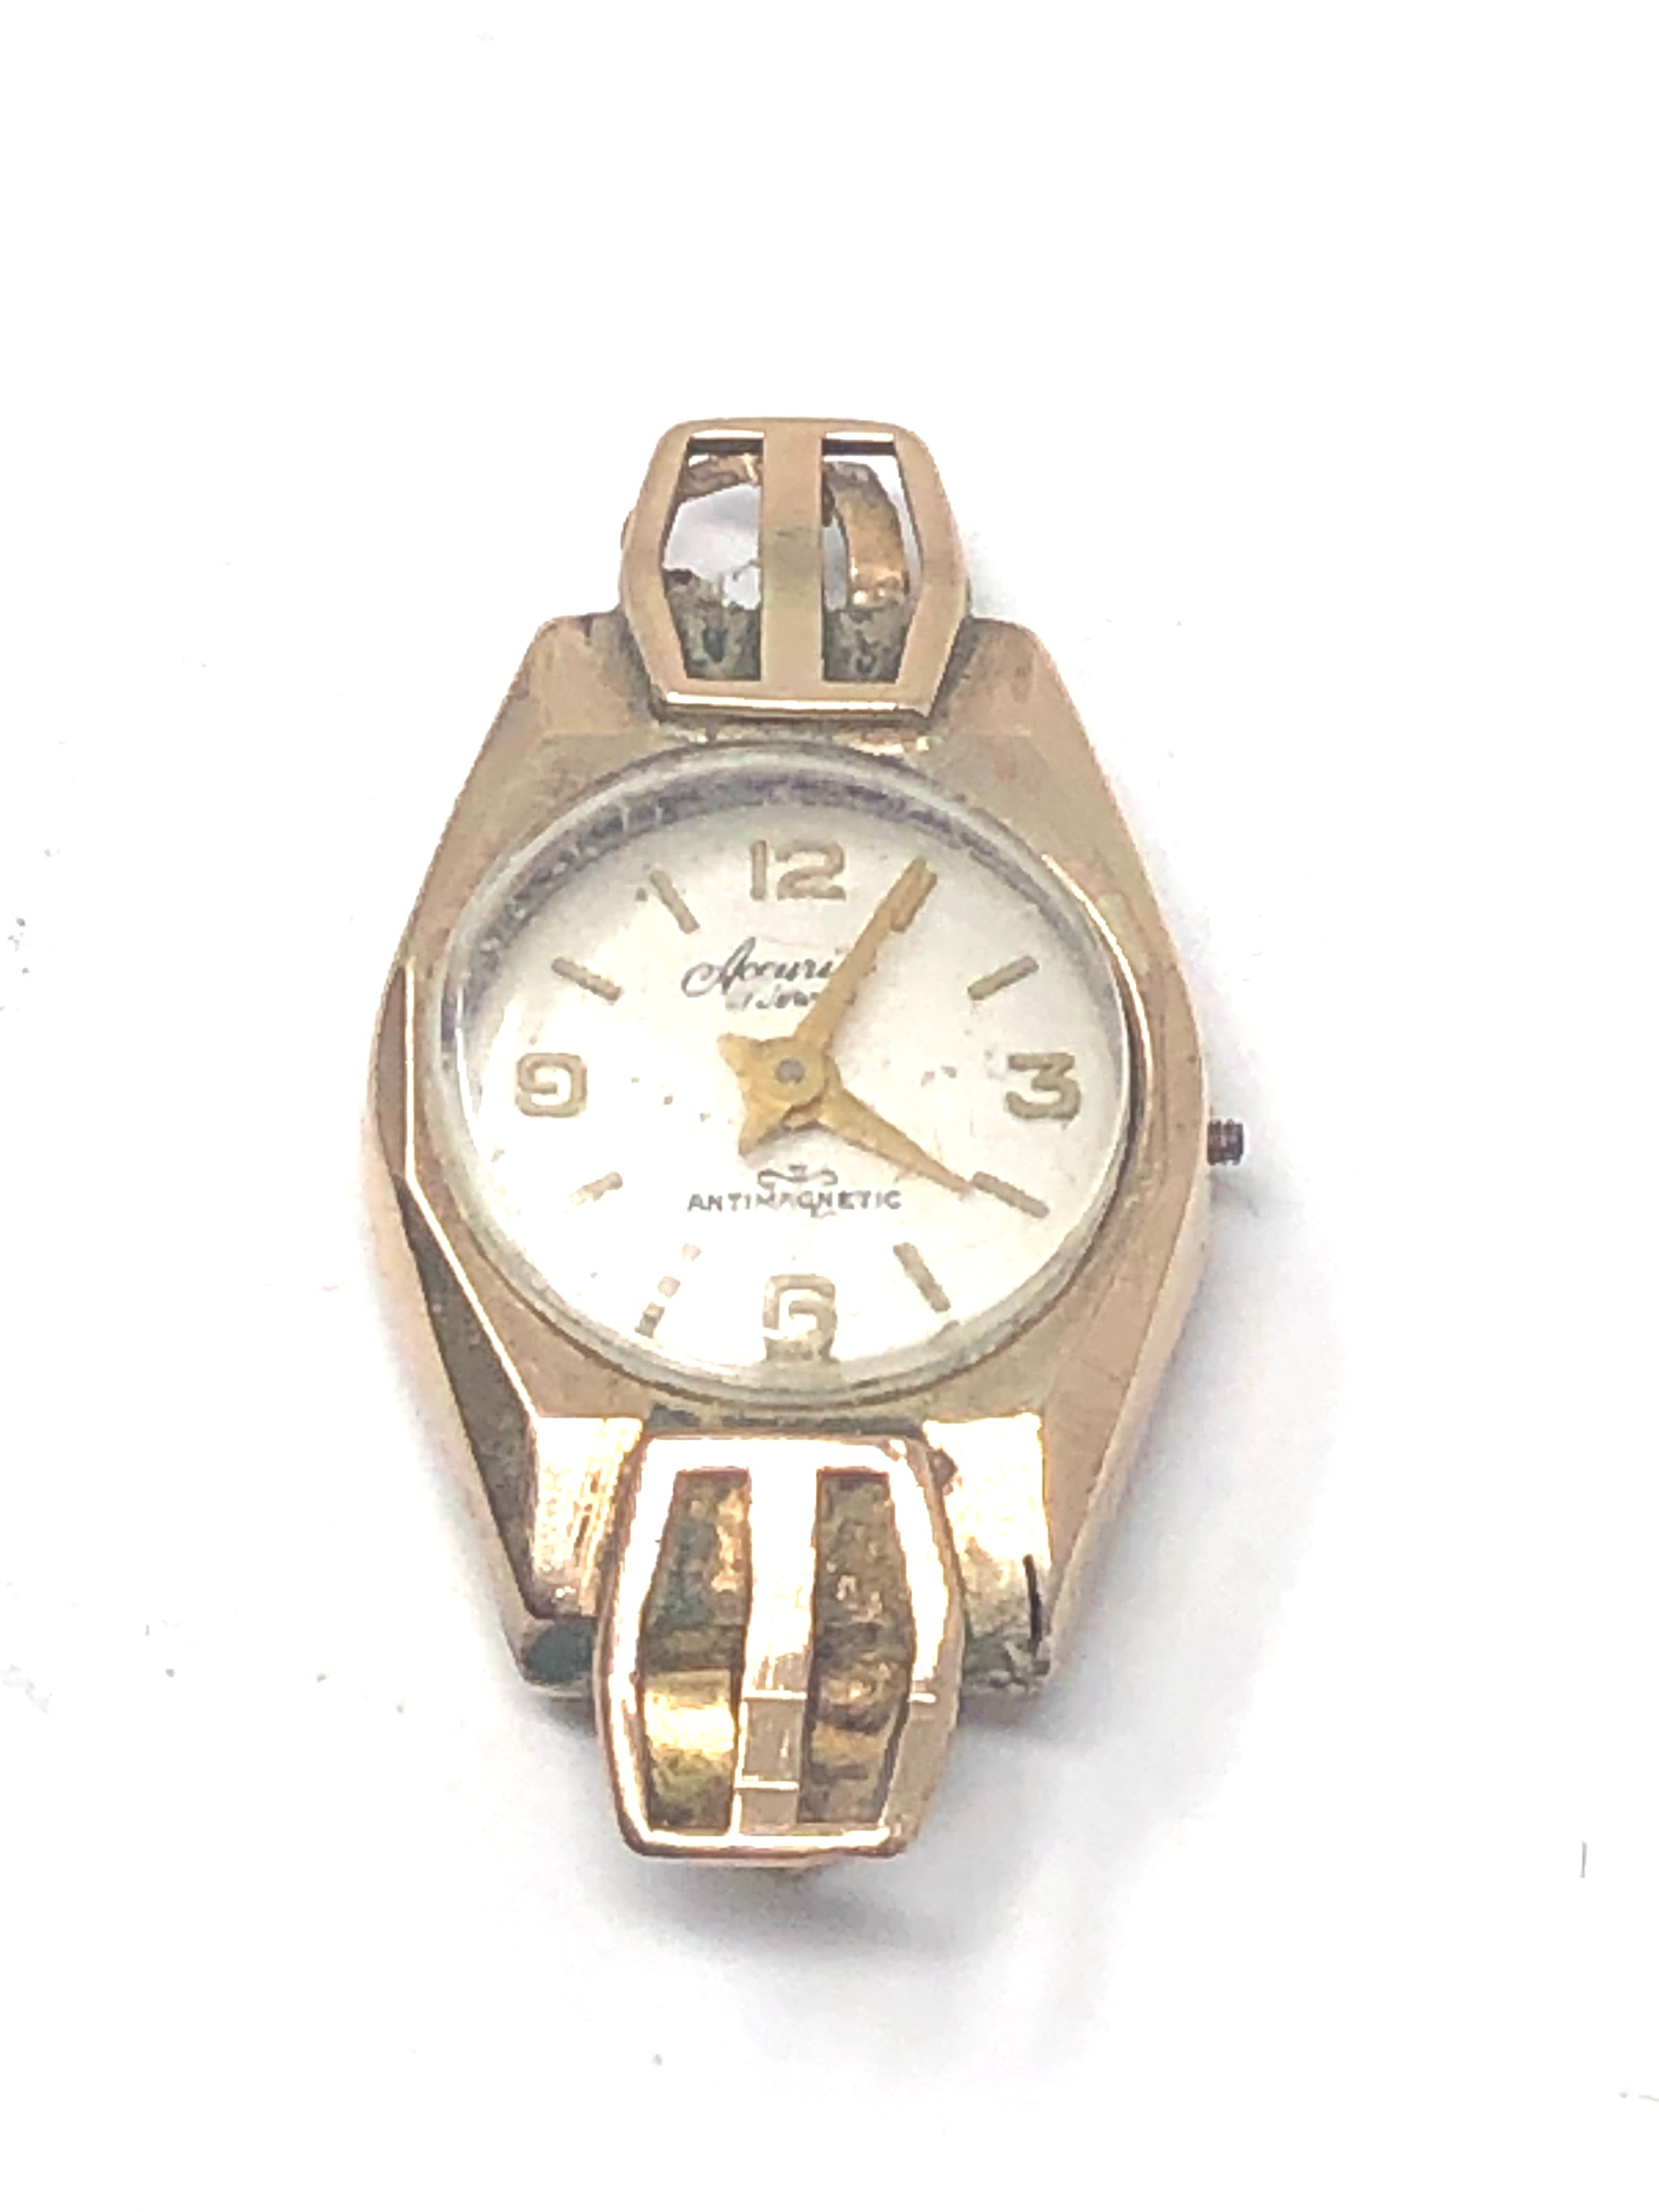 ladies 9ct gold accurist wrist watch head only for spares gold weight 2.9g